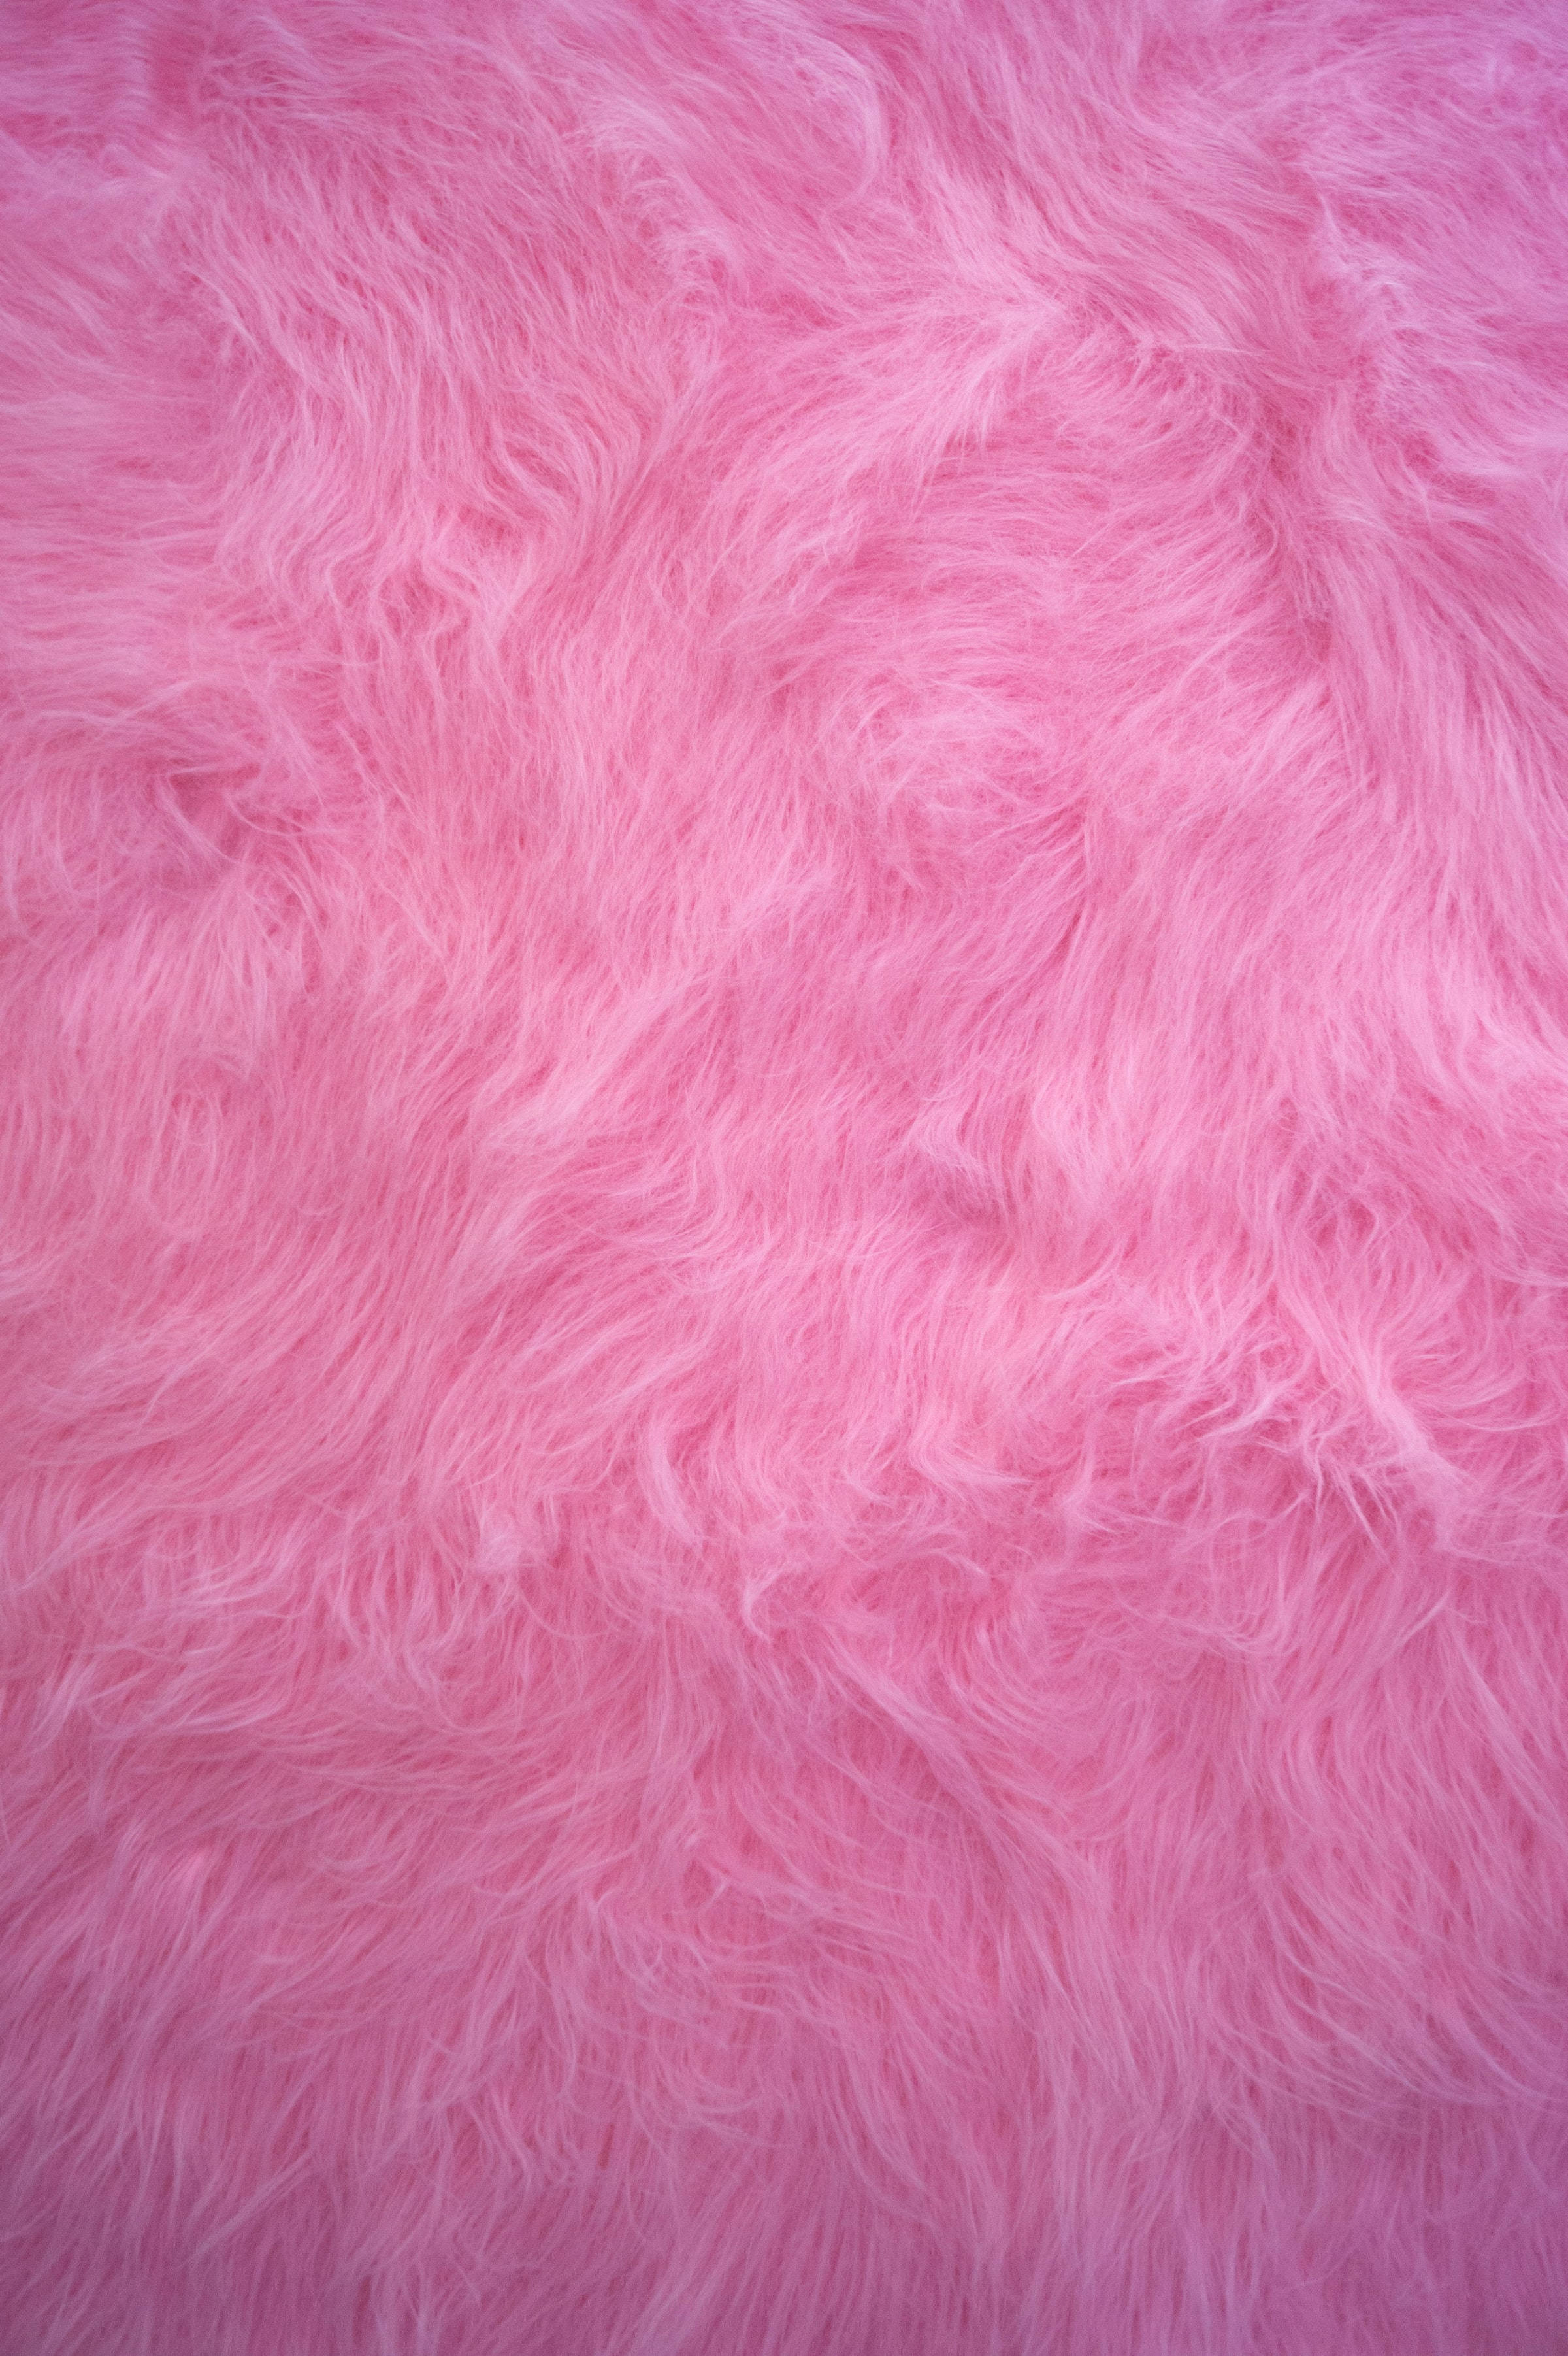 Cute Pink Aesthetic Faux Fabric Wallpaper